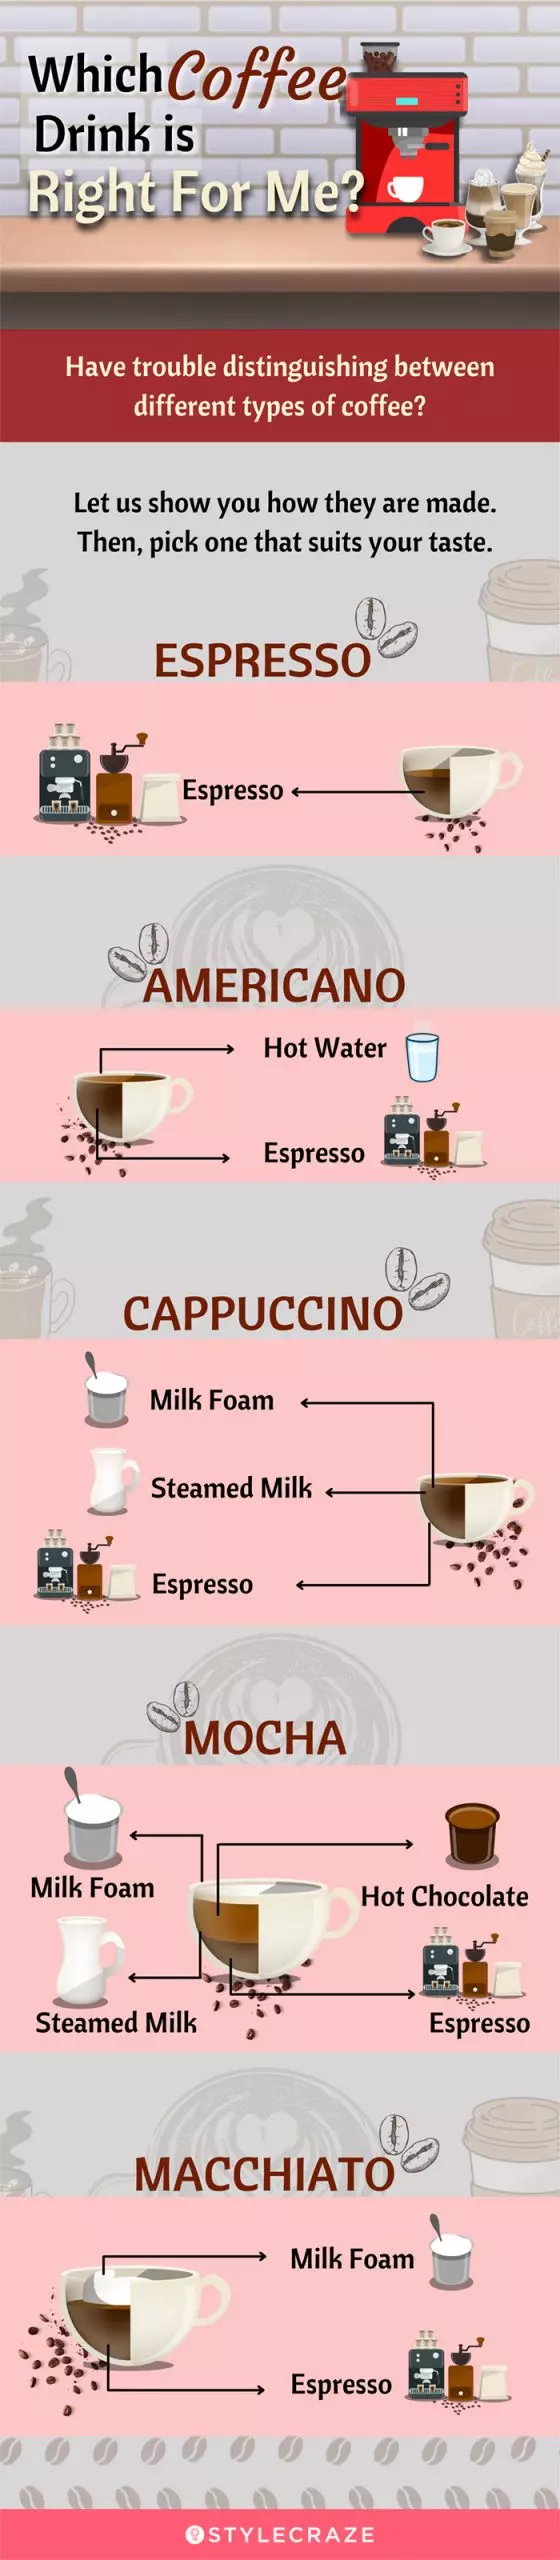 which coffee drink is right for me (infographic)